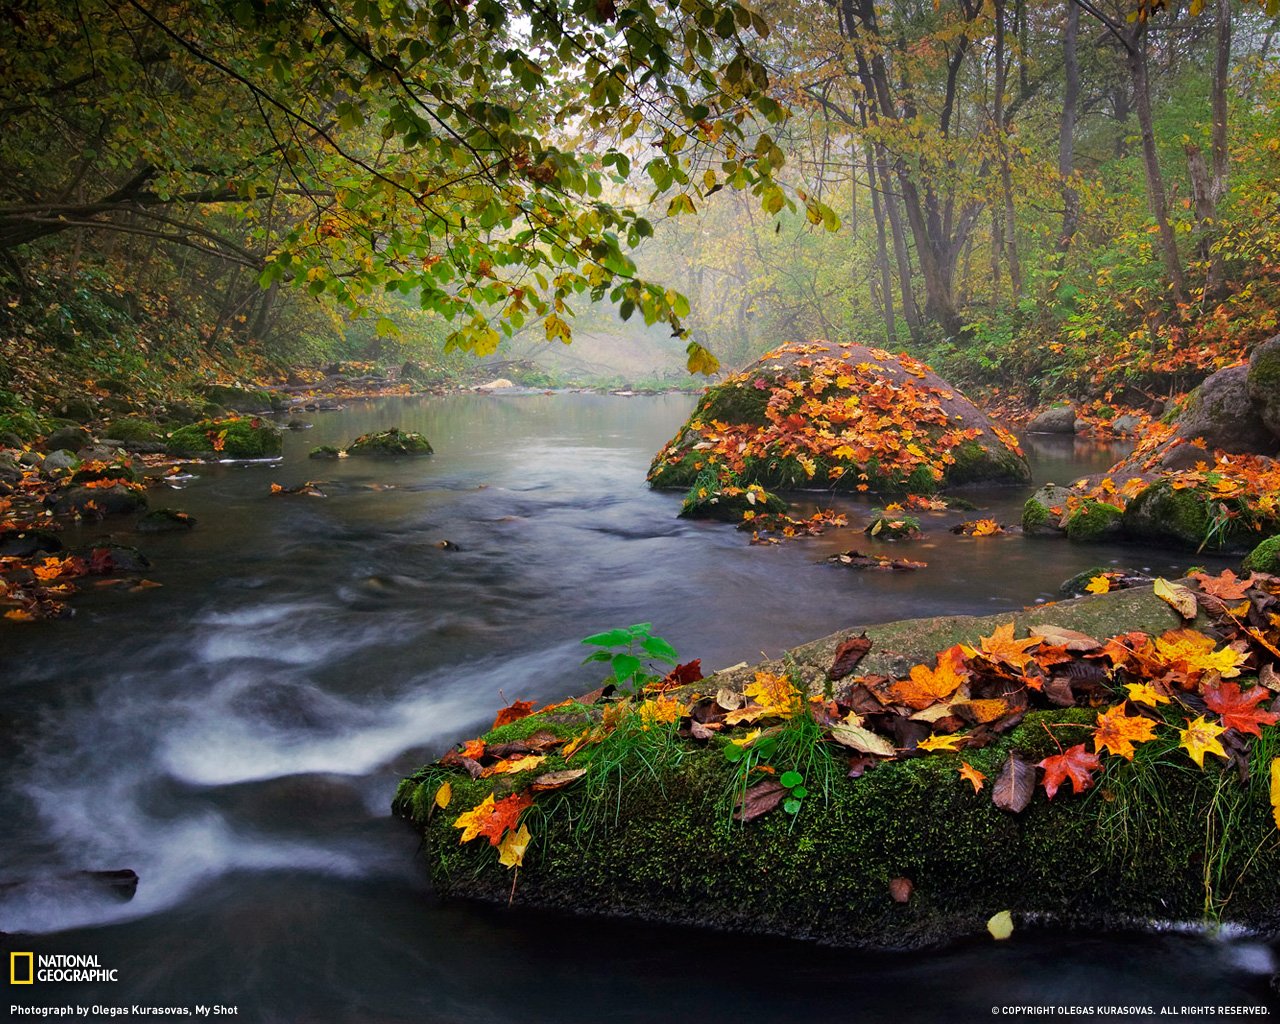  Photo Nature Wallpaper National Geographic Photo of the Day 1280x1024